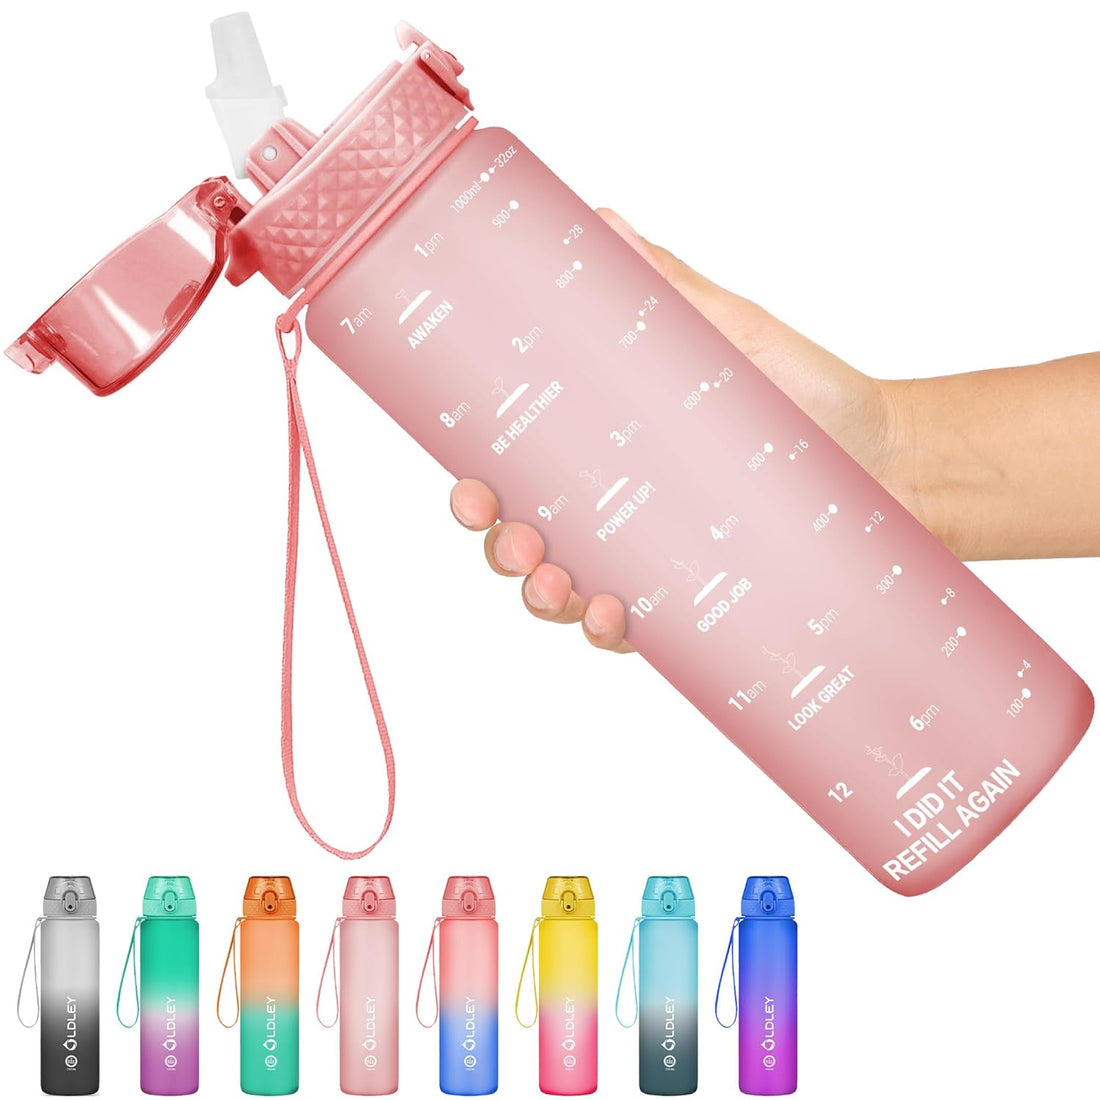 OLDLEY 32 oz Water Bottles with Times to Drink, (Straw lid) Motivational Water Bottle with Time Marker, Leakproof & BPA Free, Drinking Sports Water Bottle for Fitness, Gym & Outdoor (Pink)